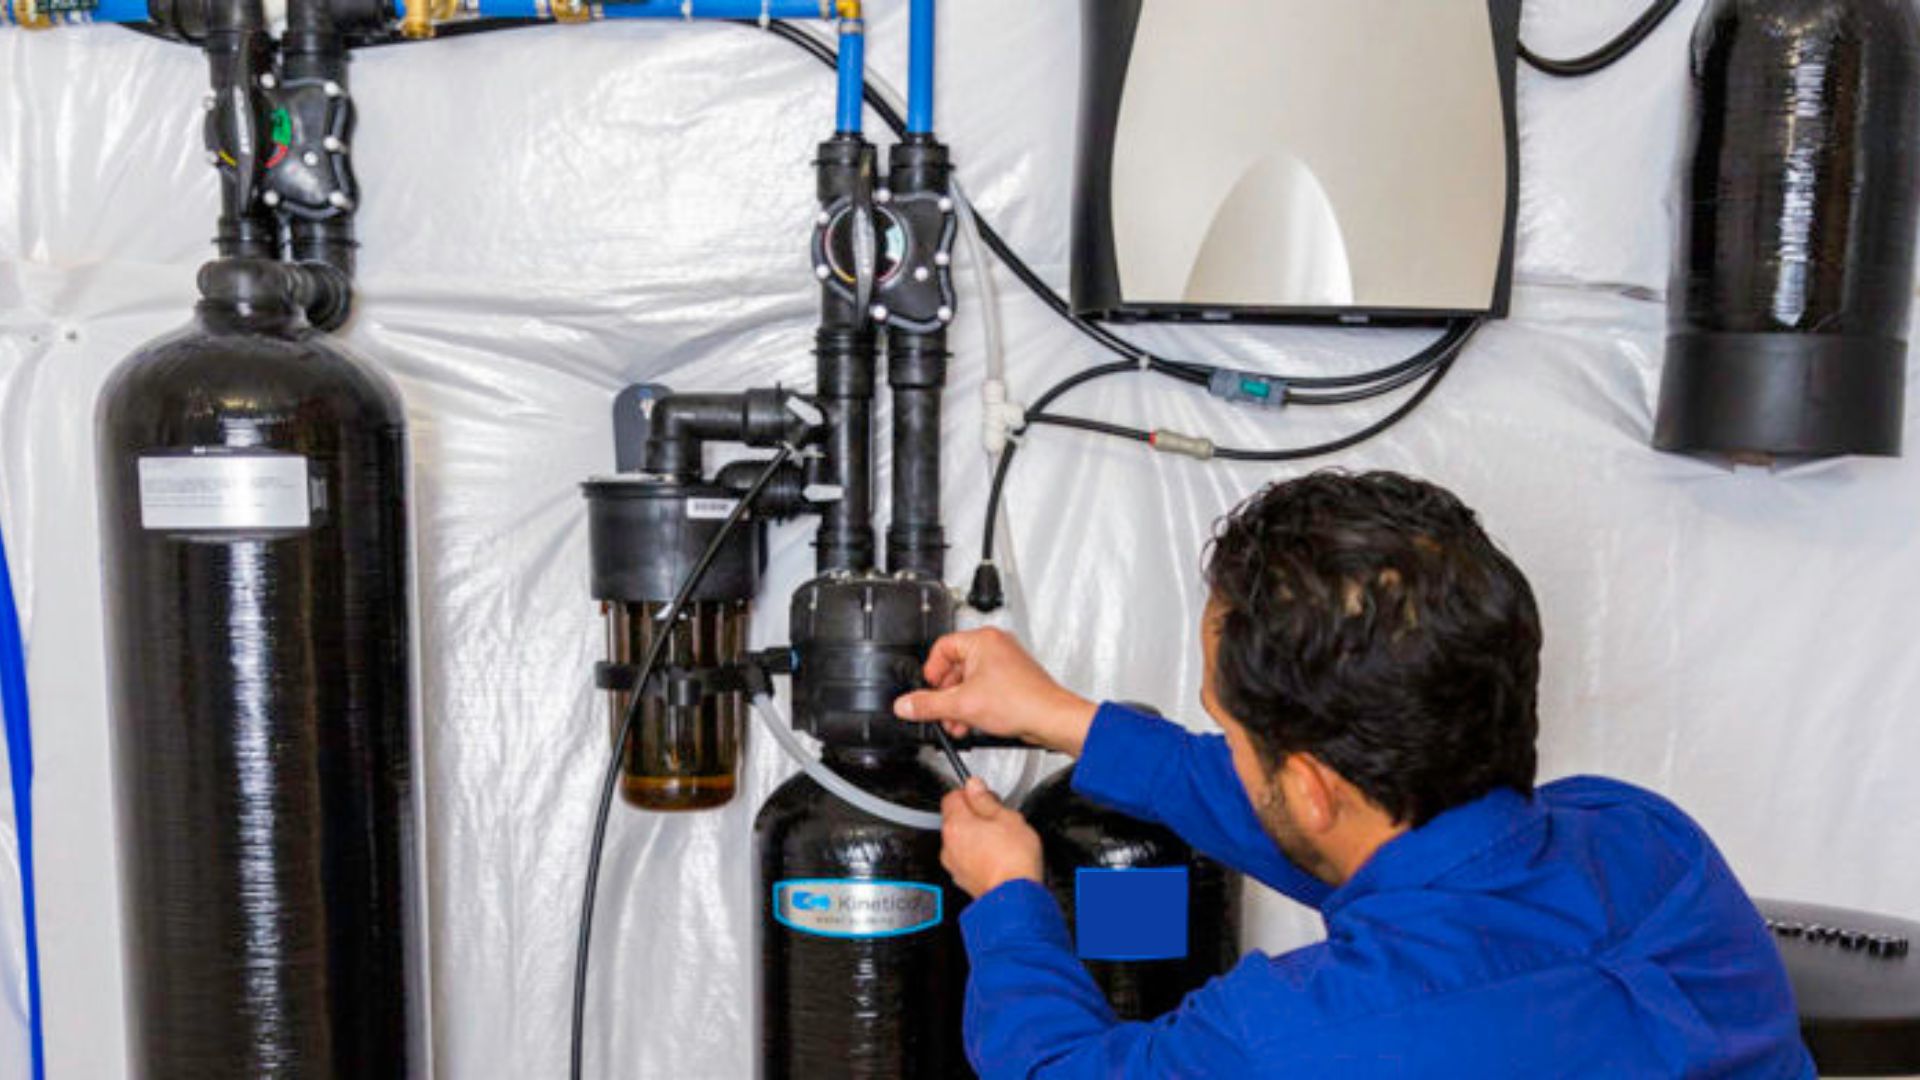 Installation of water softener by plumbers